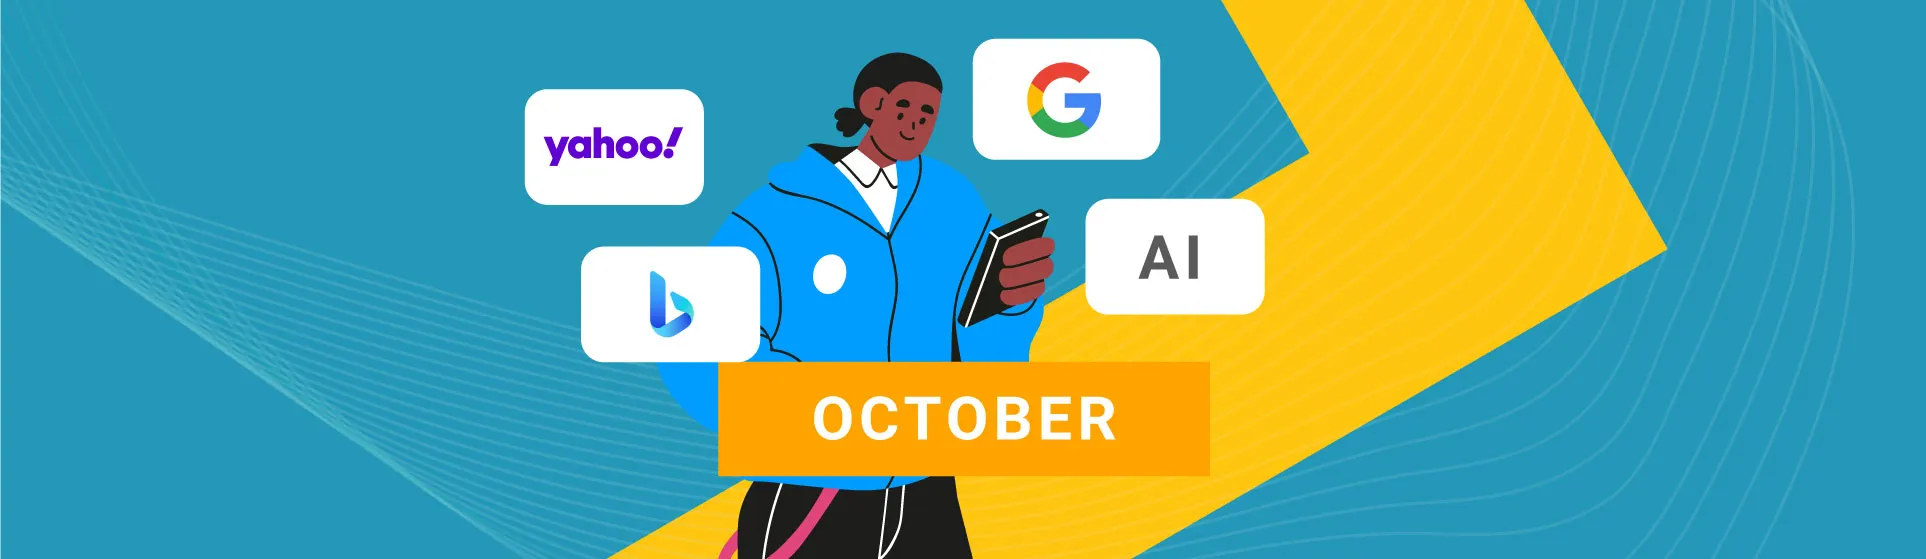 Google Search Updates – November ’21 Changes